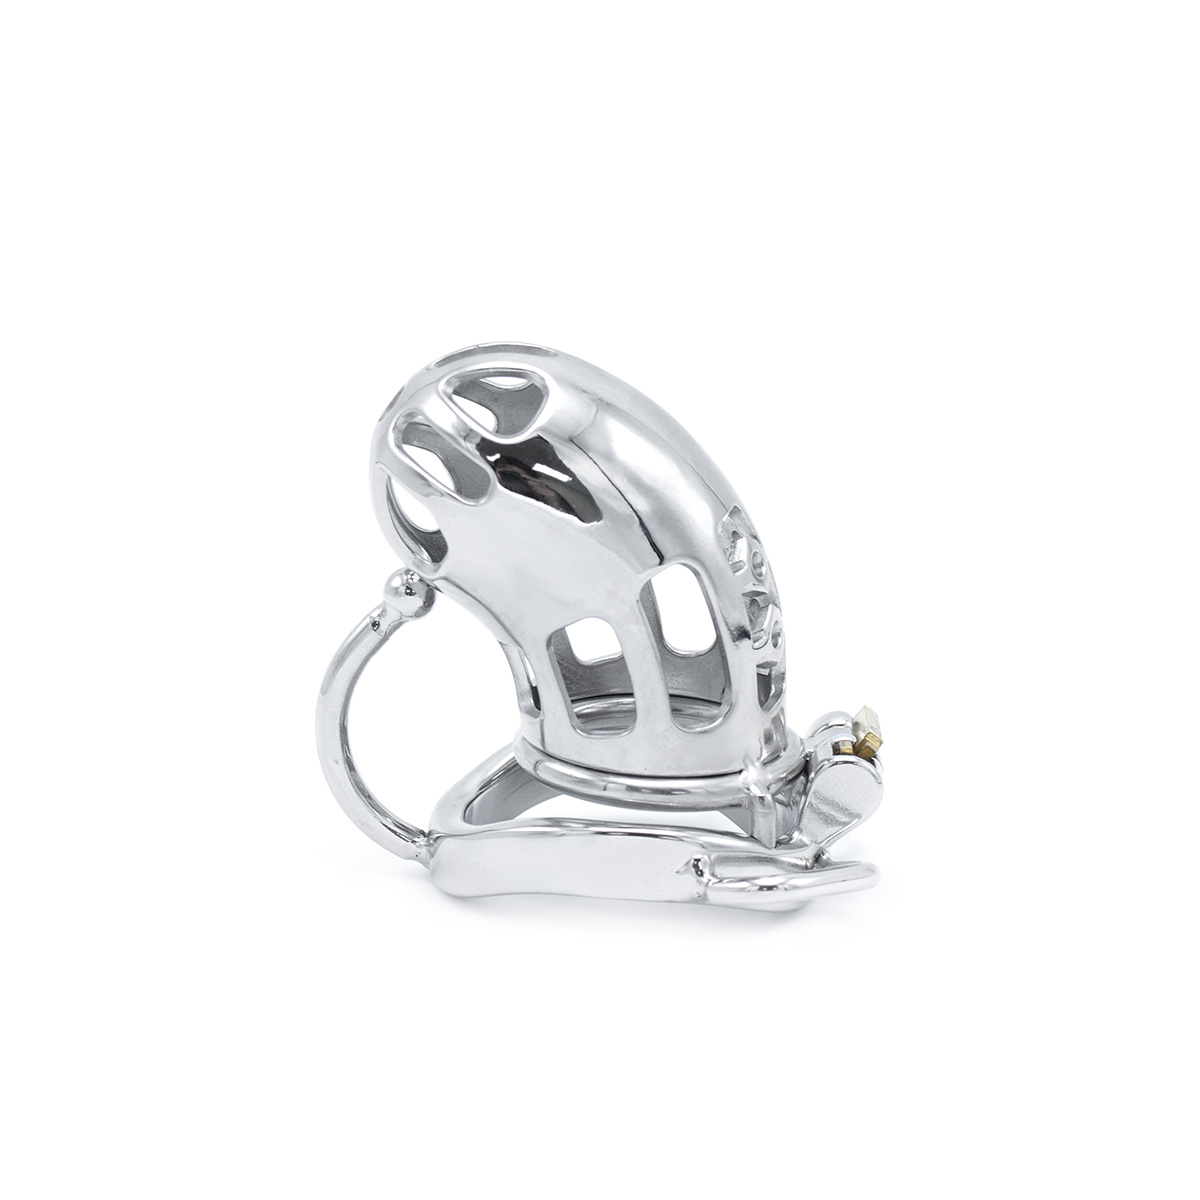 Belted-Chastity-Device-with-Ball-Divider-OPR-278014-3